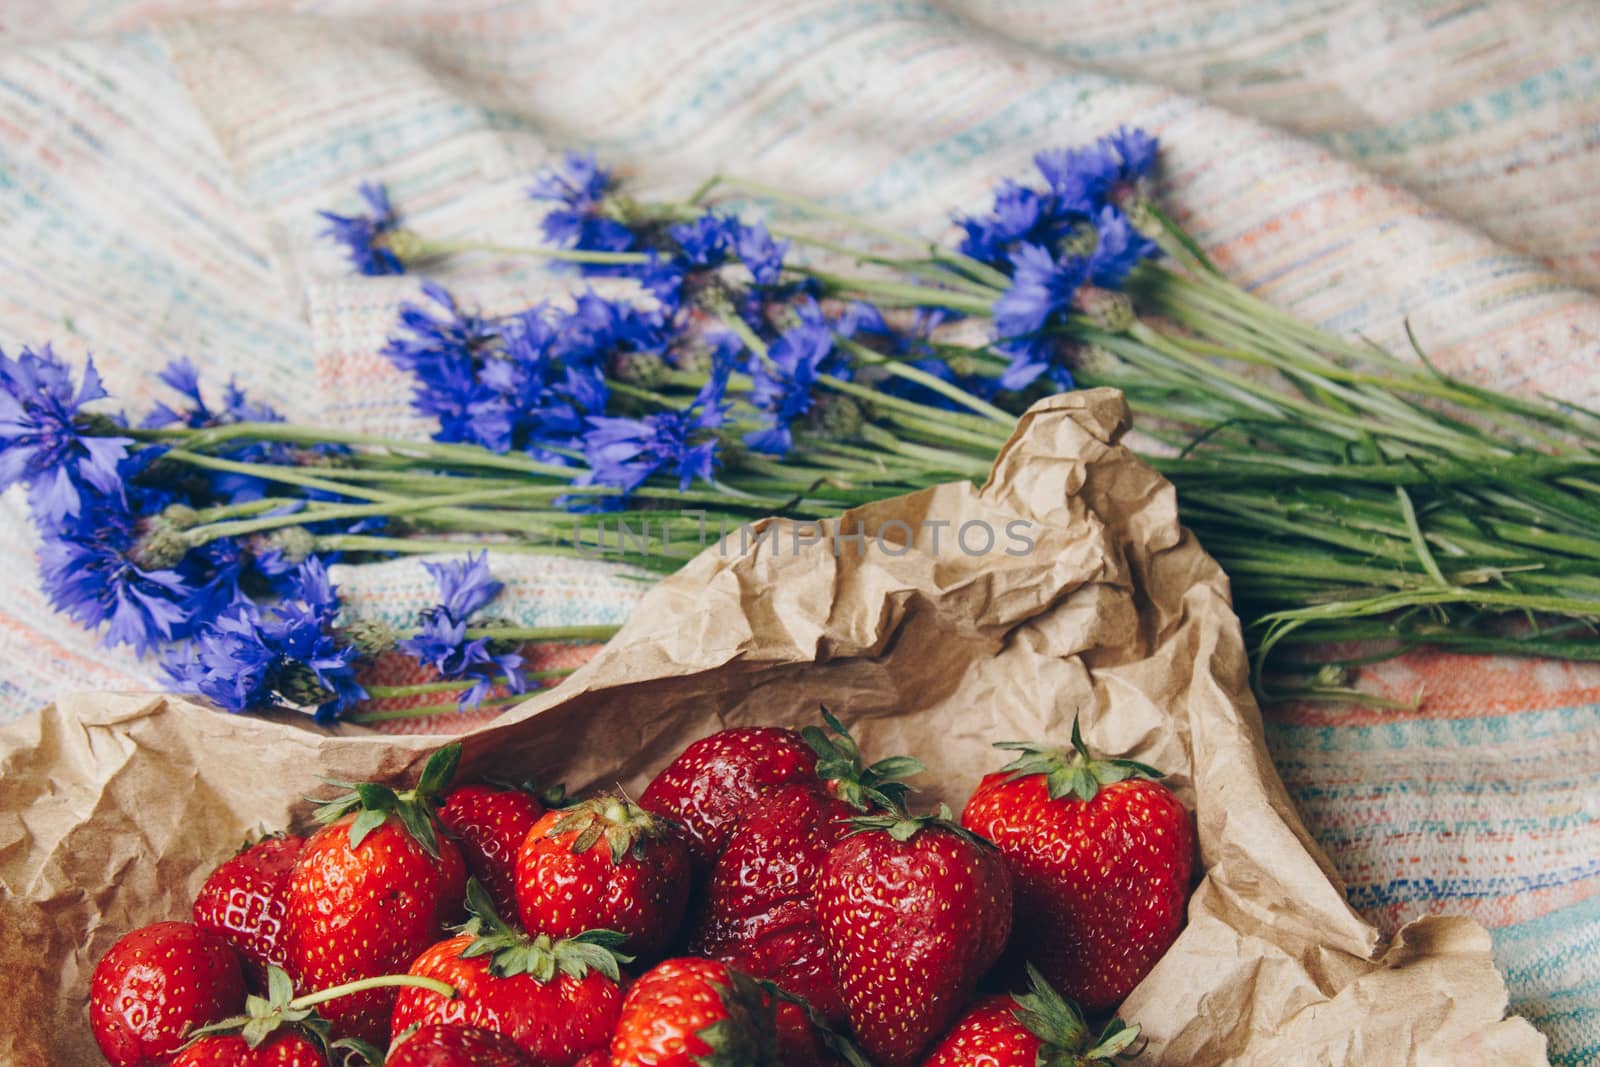 Seasonal summer flowers in vase blue cornflowers and fruits strawberries on a napkin close-up conceptual background